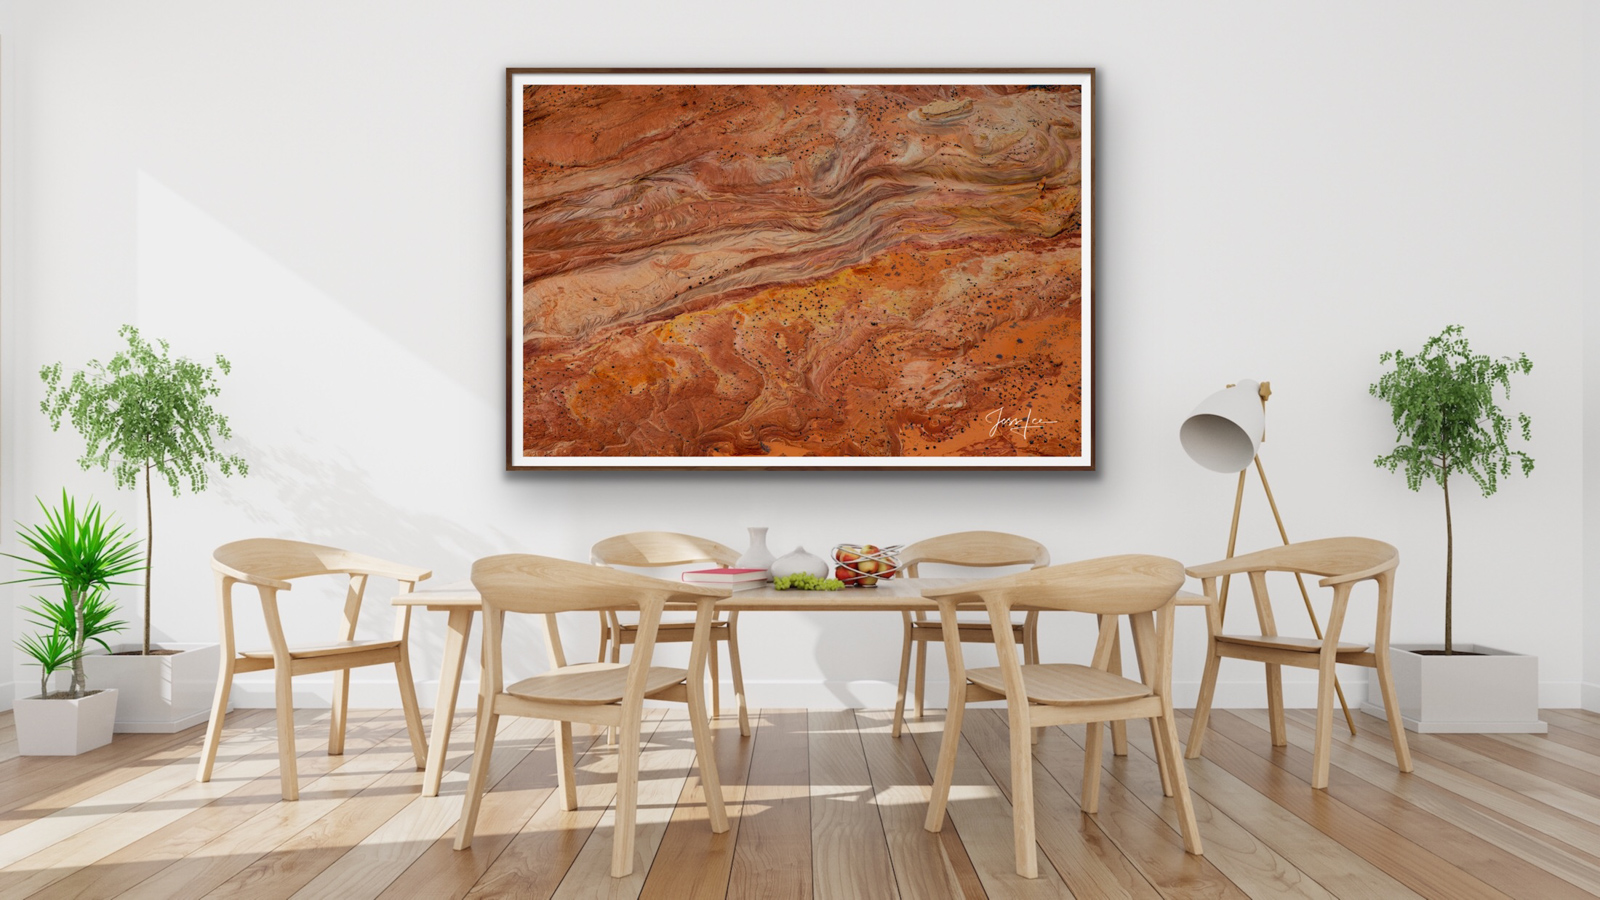 Abstract Sandstone Photography Prints. Pictures are available as Acrylic, Metal, Canvas, or Fine Art Paper limited edition wall...